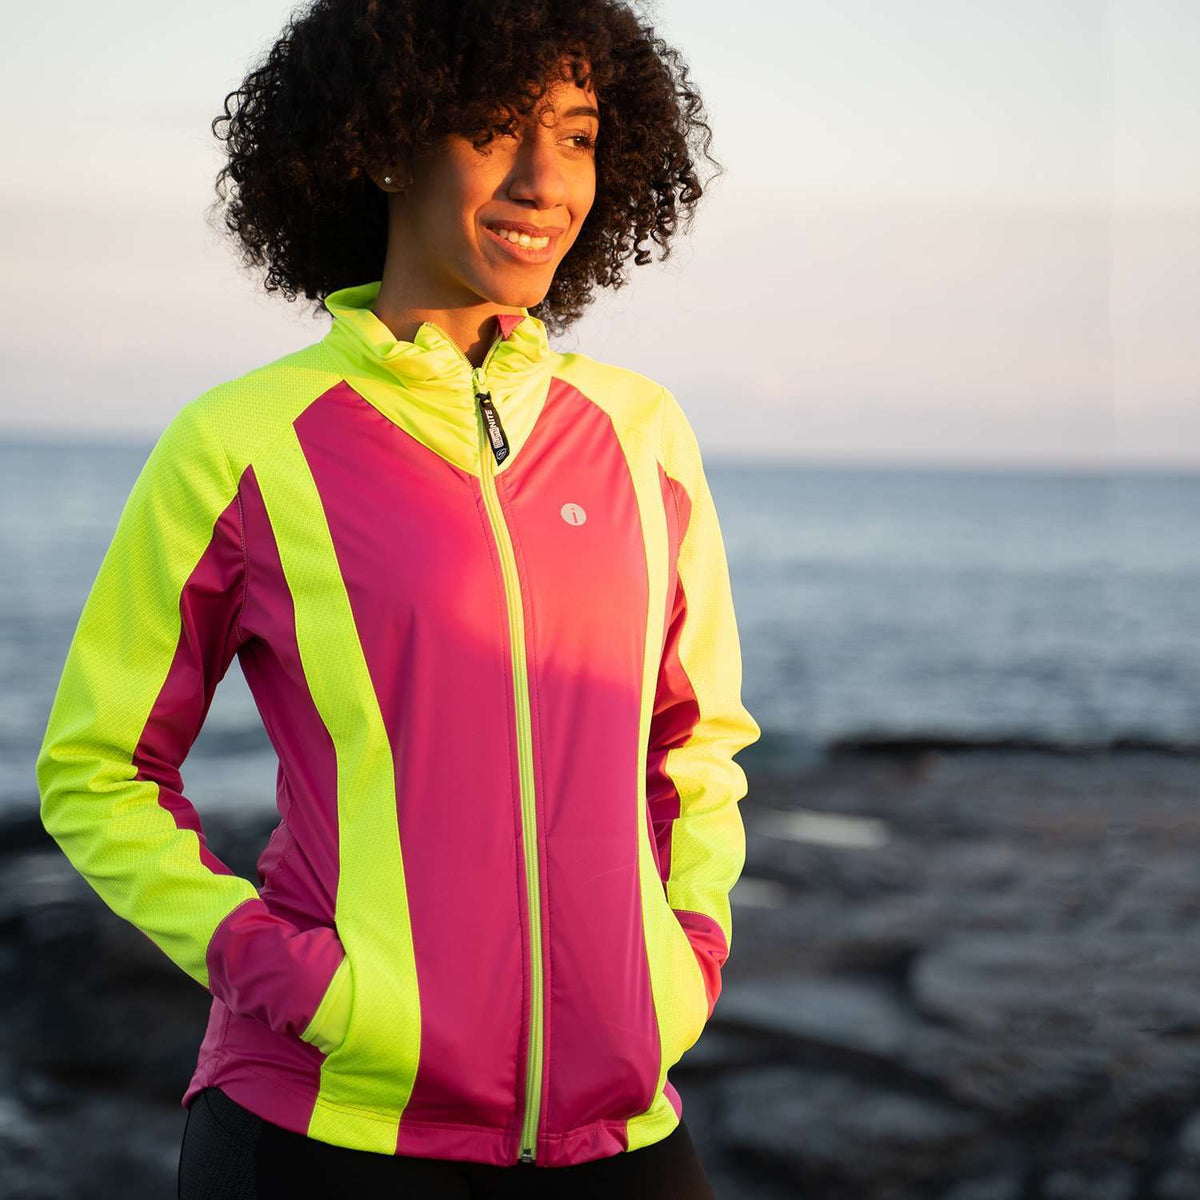 Albany Reflective Women's Softshell Jacket in Beetroot/Flo Lime